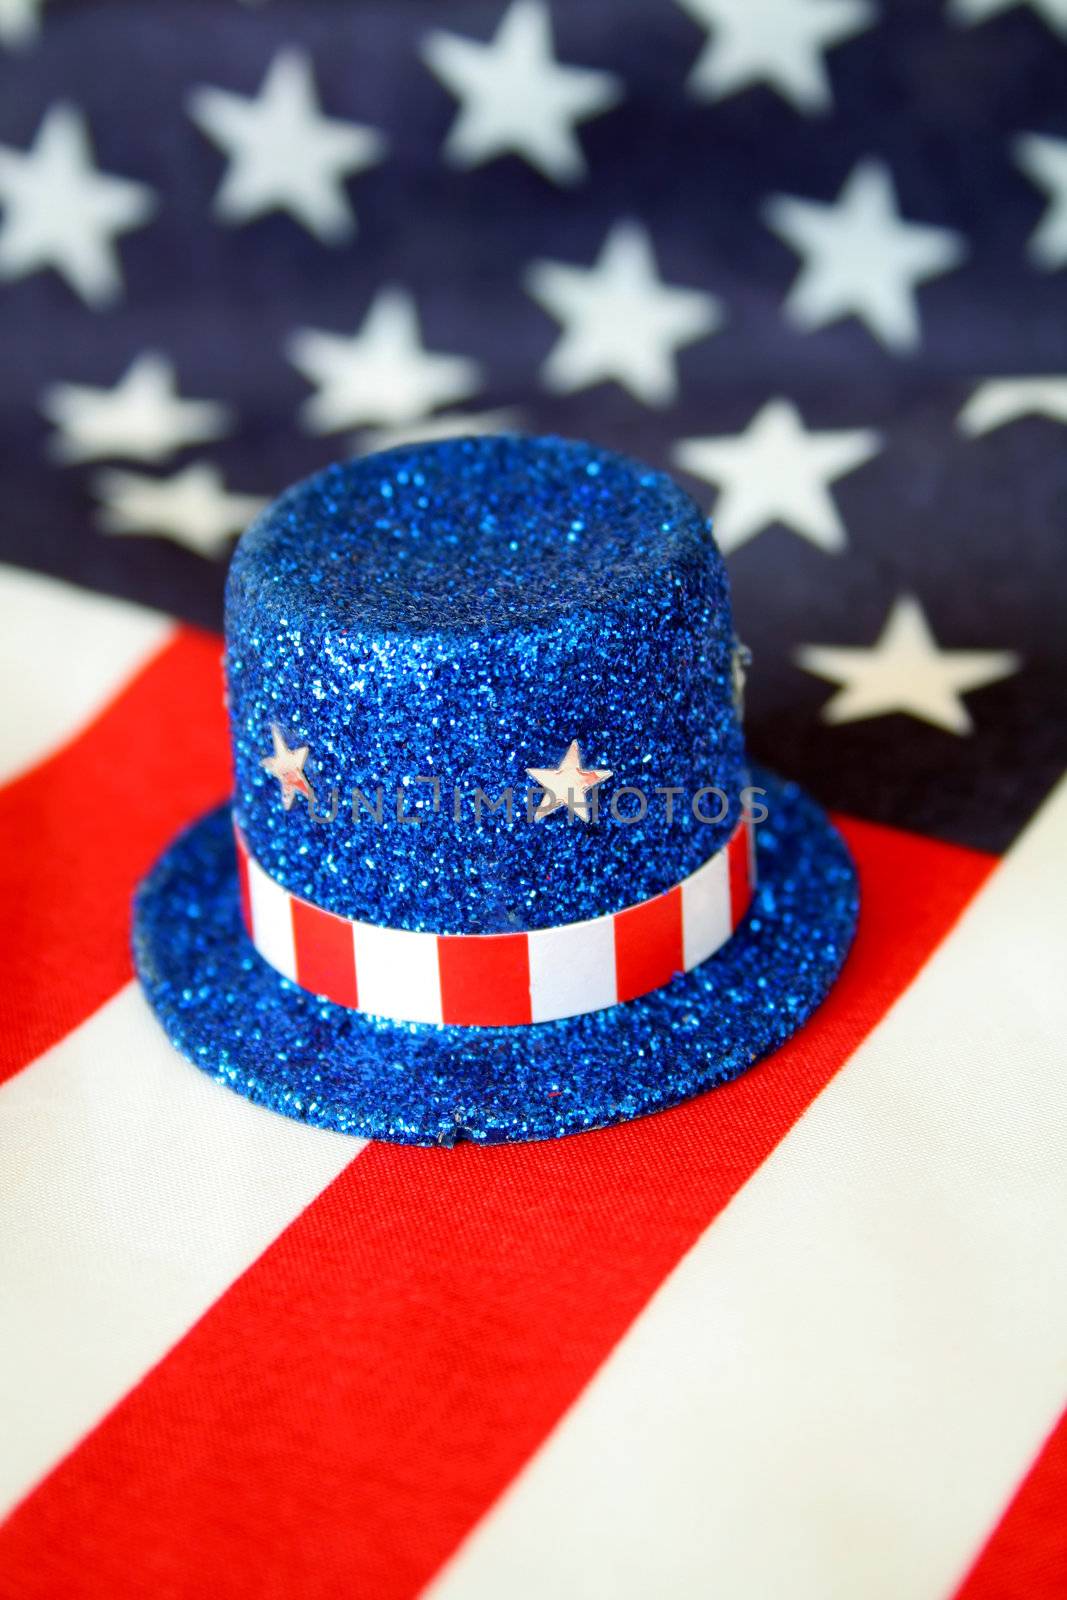 A top hat of blue glitter along with stars and stripes.  American flag is used as the background.